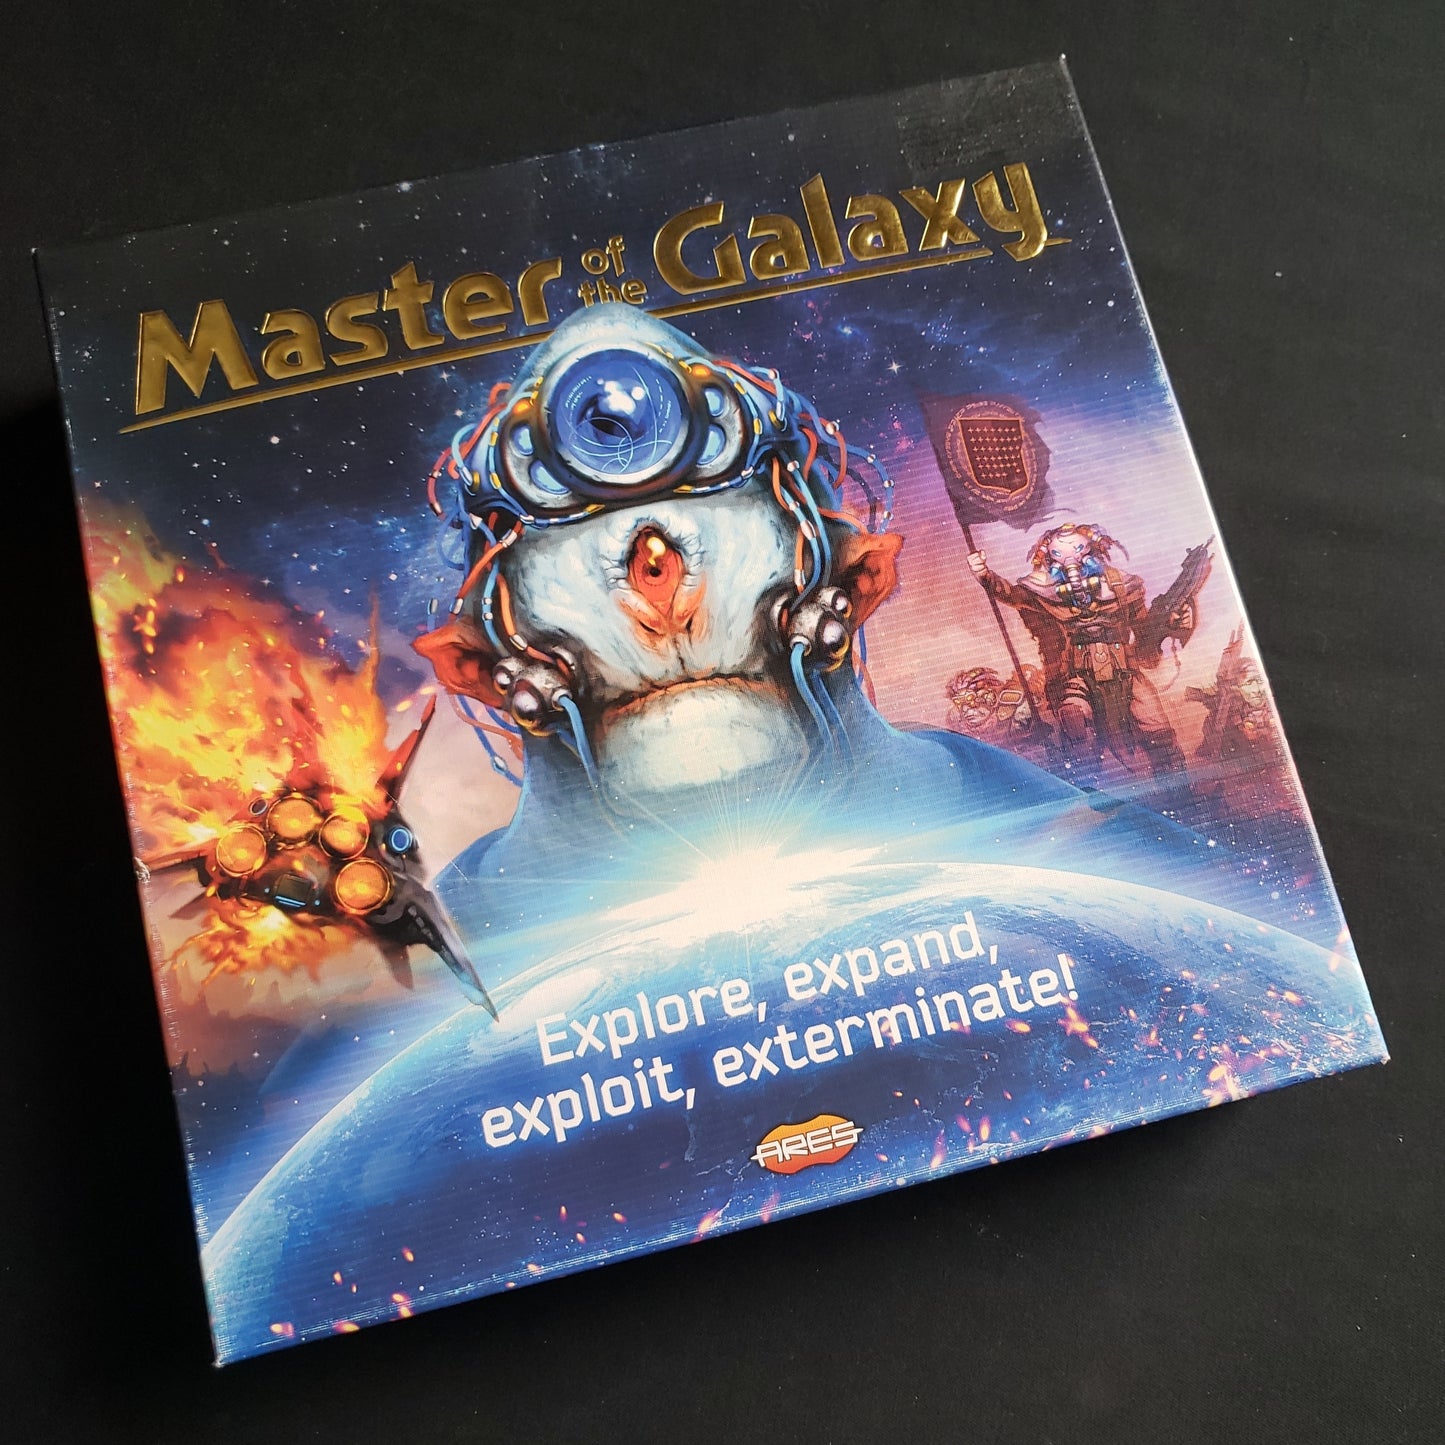 Image shows the front cover of the box of the Master of the Galaxy board game